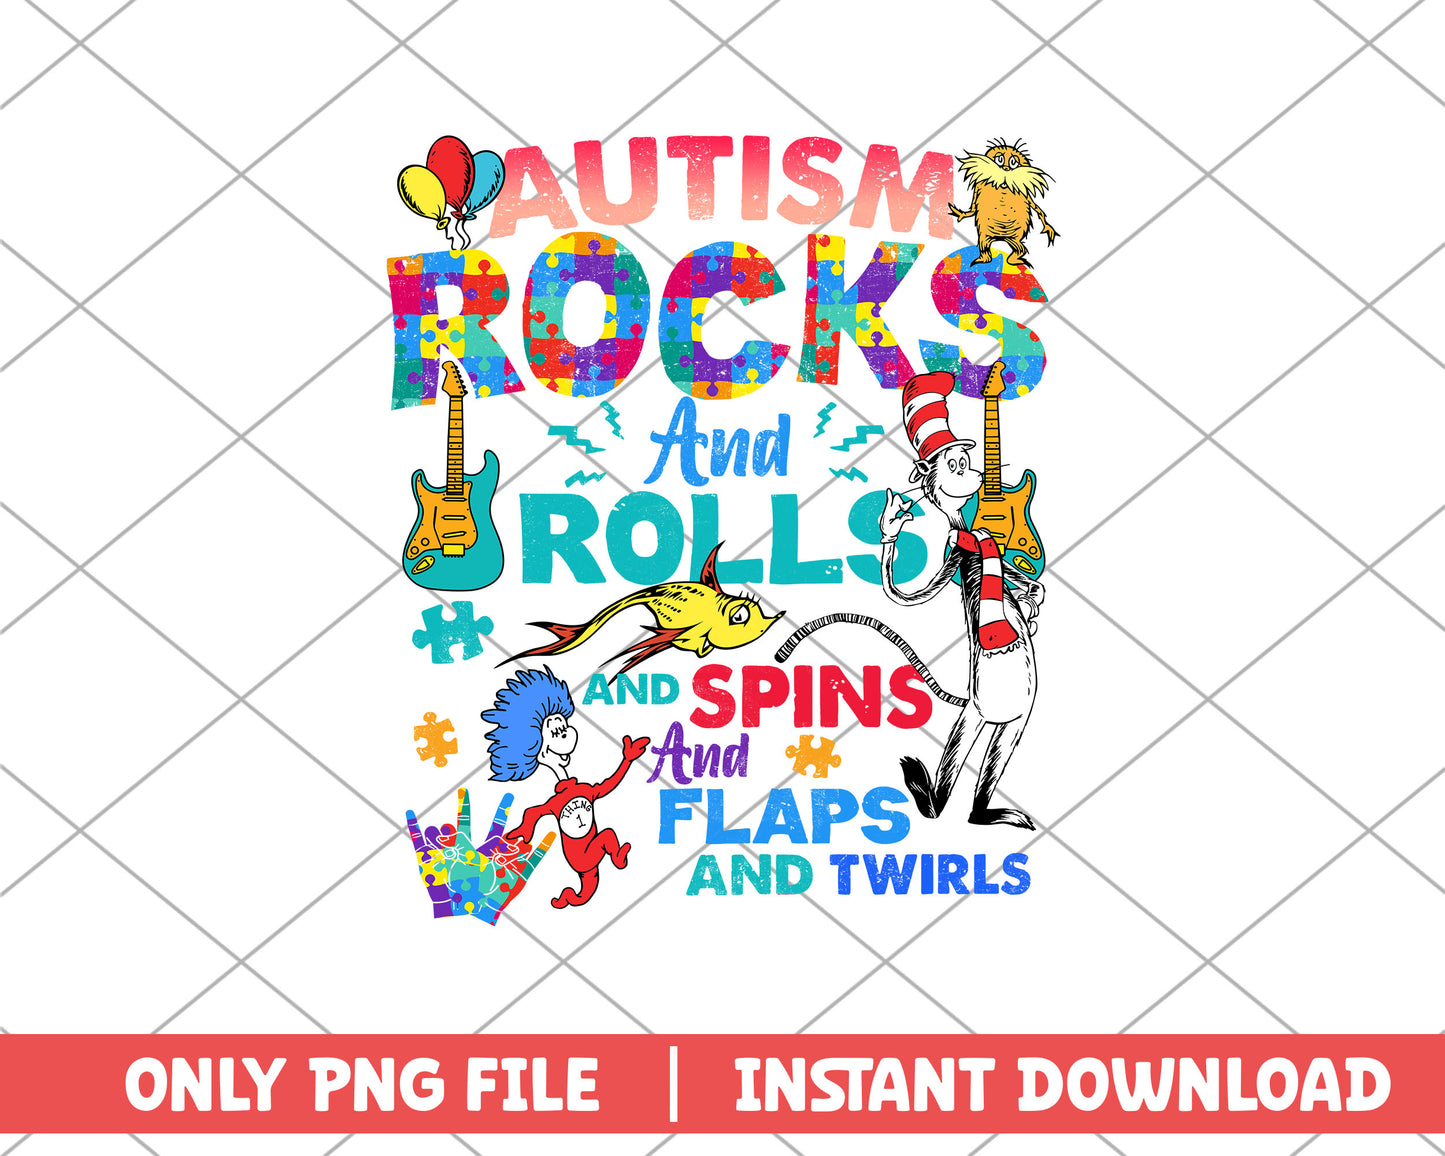 Autism rocks and rolls and spins and flaps png 